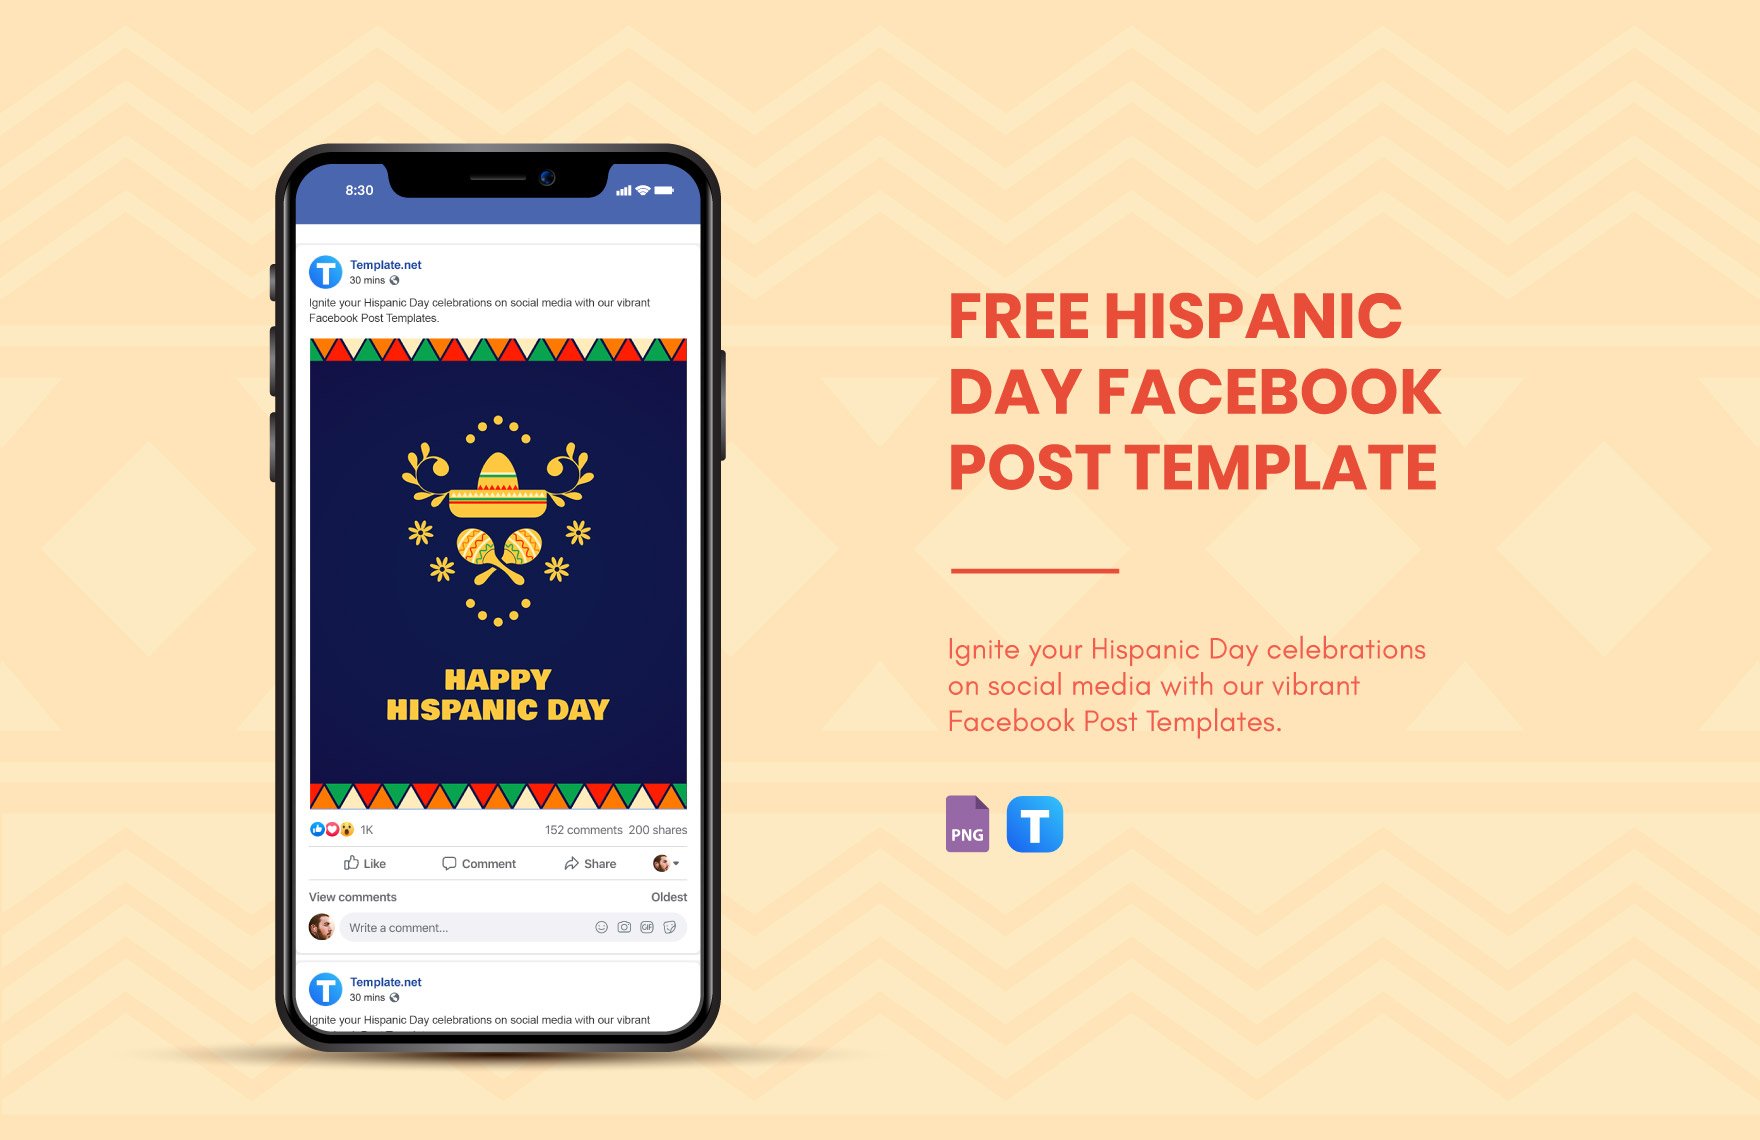 Free Hispanic Day Facebook Post Template in PNG